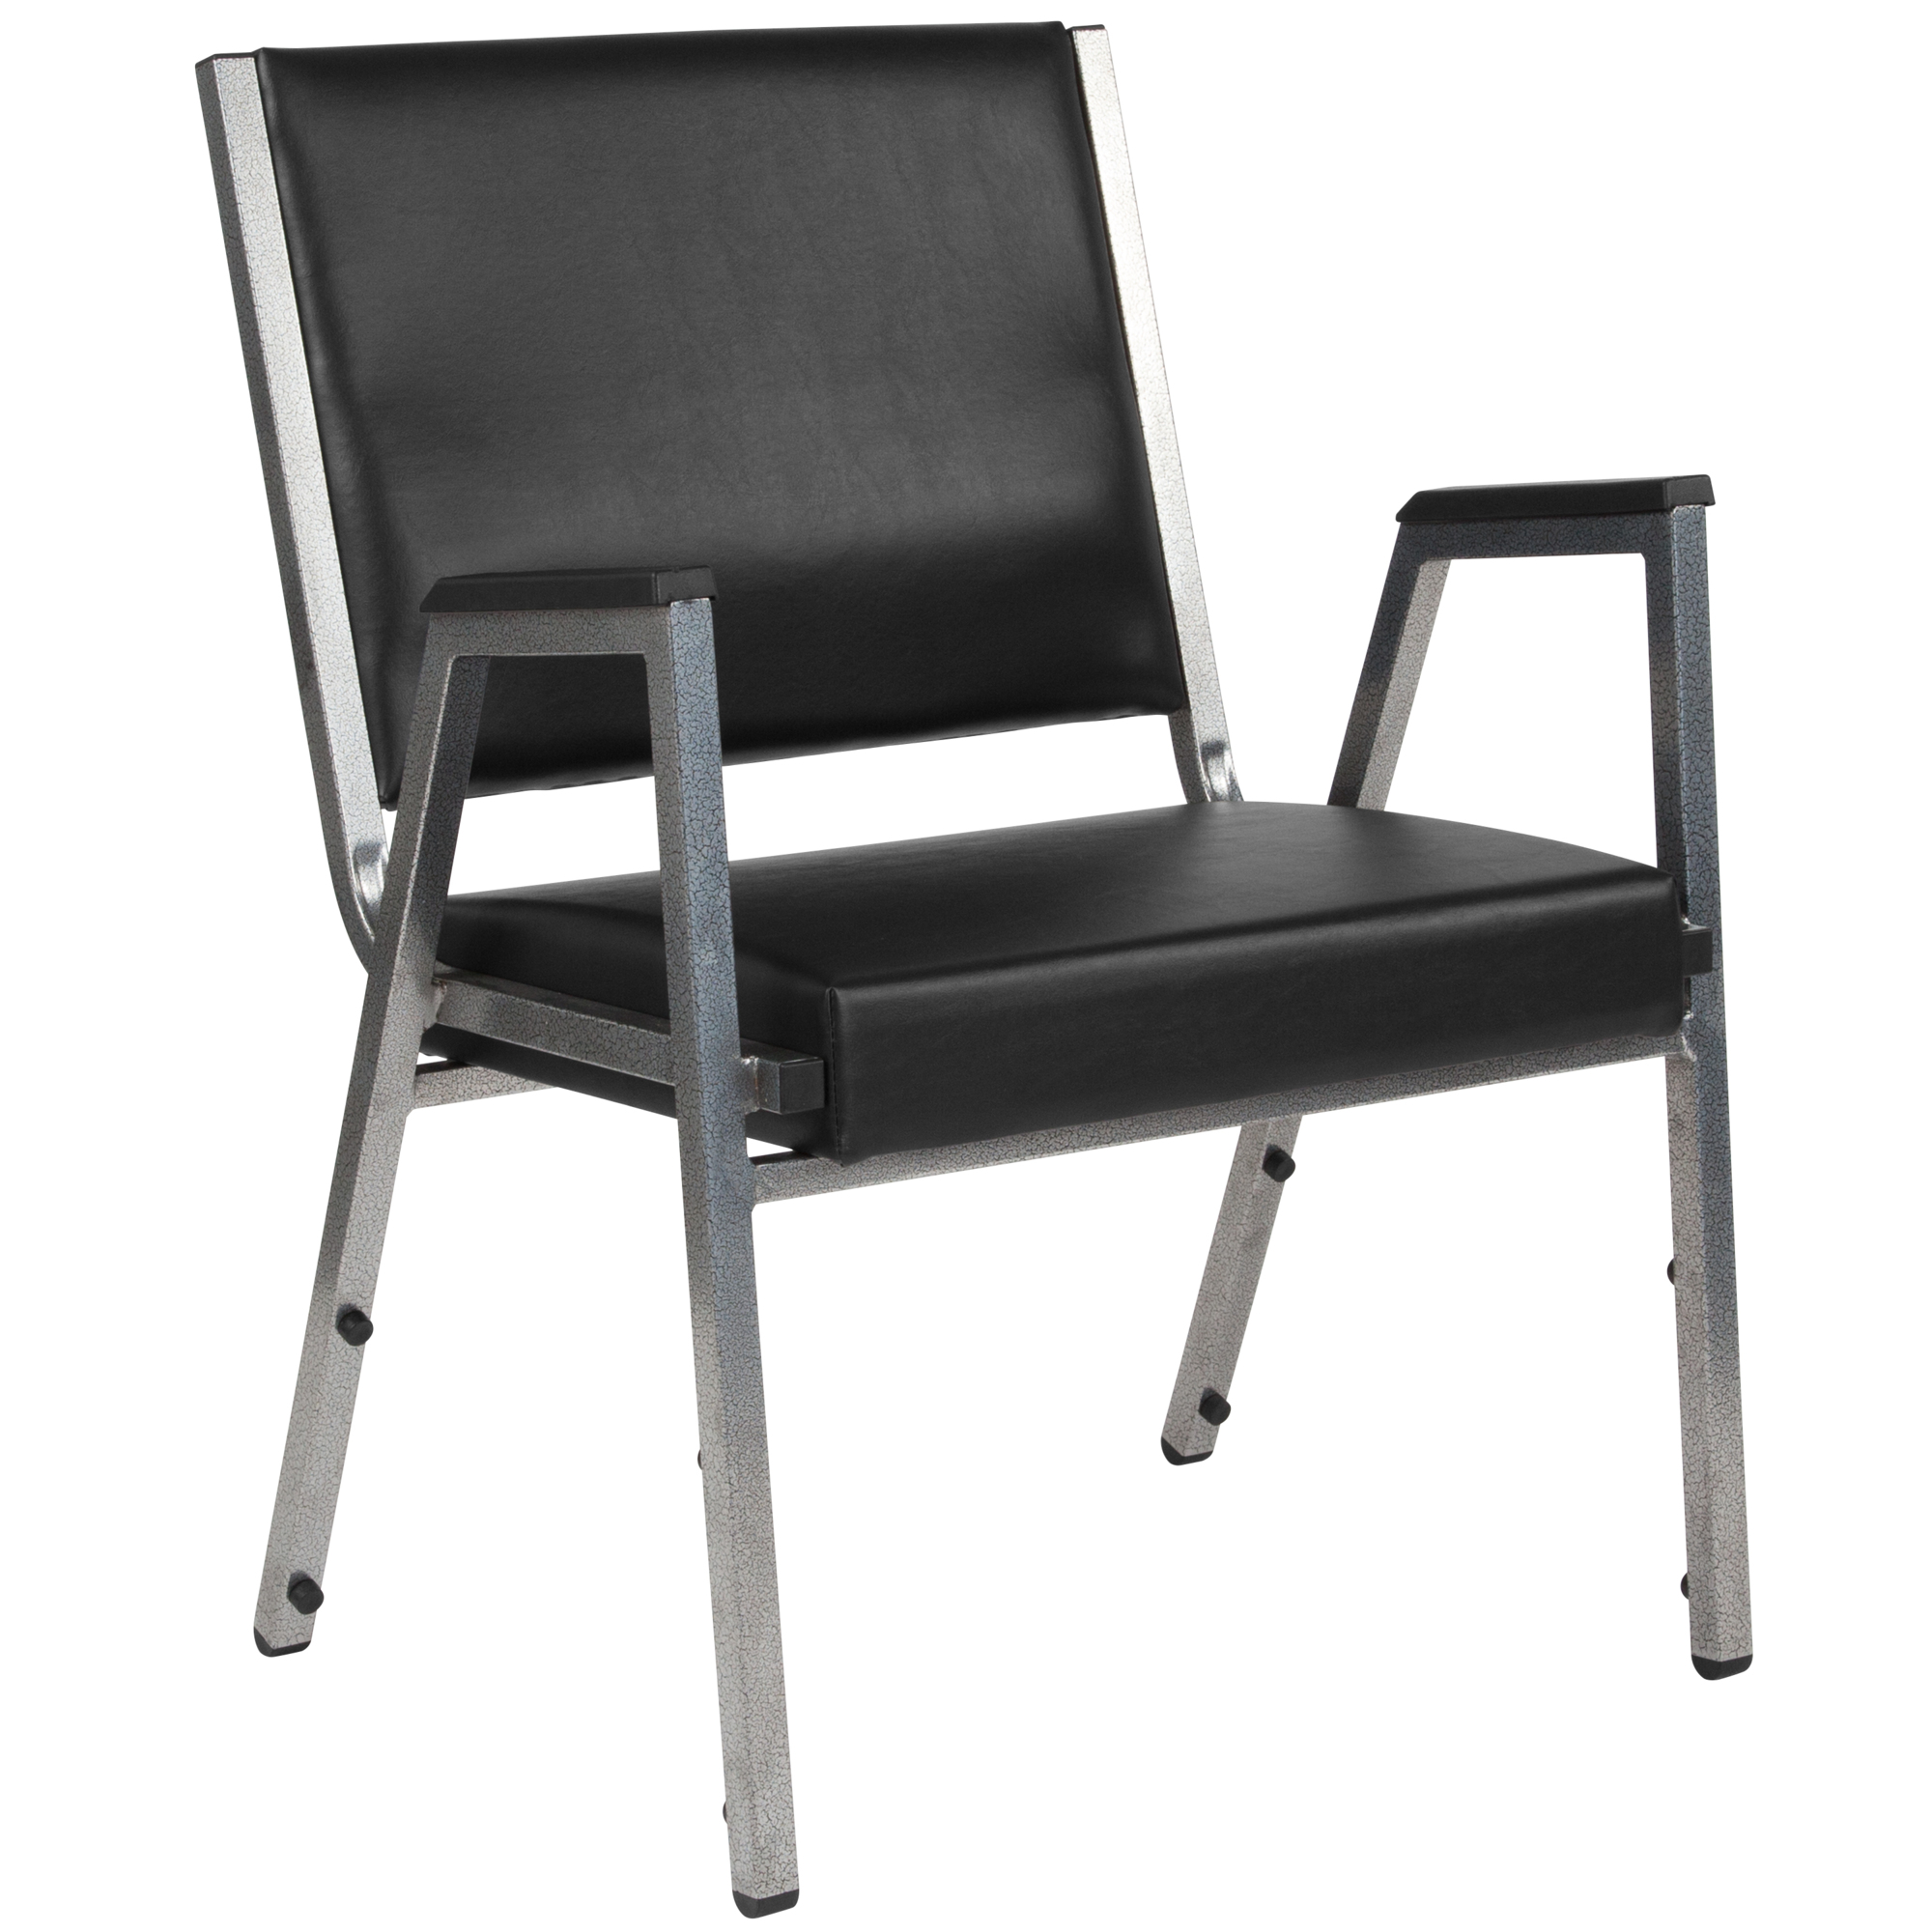 Flash Furniture, 1000 lb. Rated Black Vinyl Bariatric Arm Chair, Primary Color Black, Included (qty.) 1, Model XU604436701BKVY